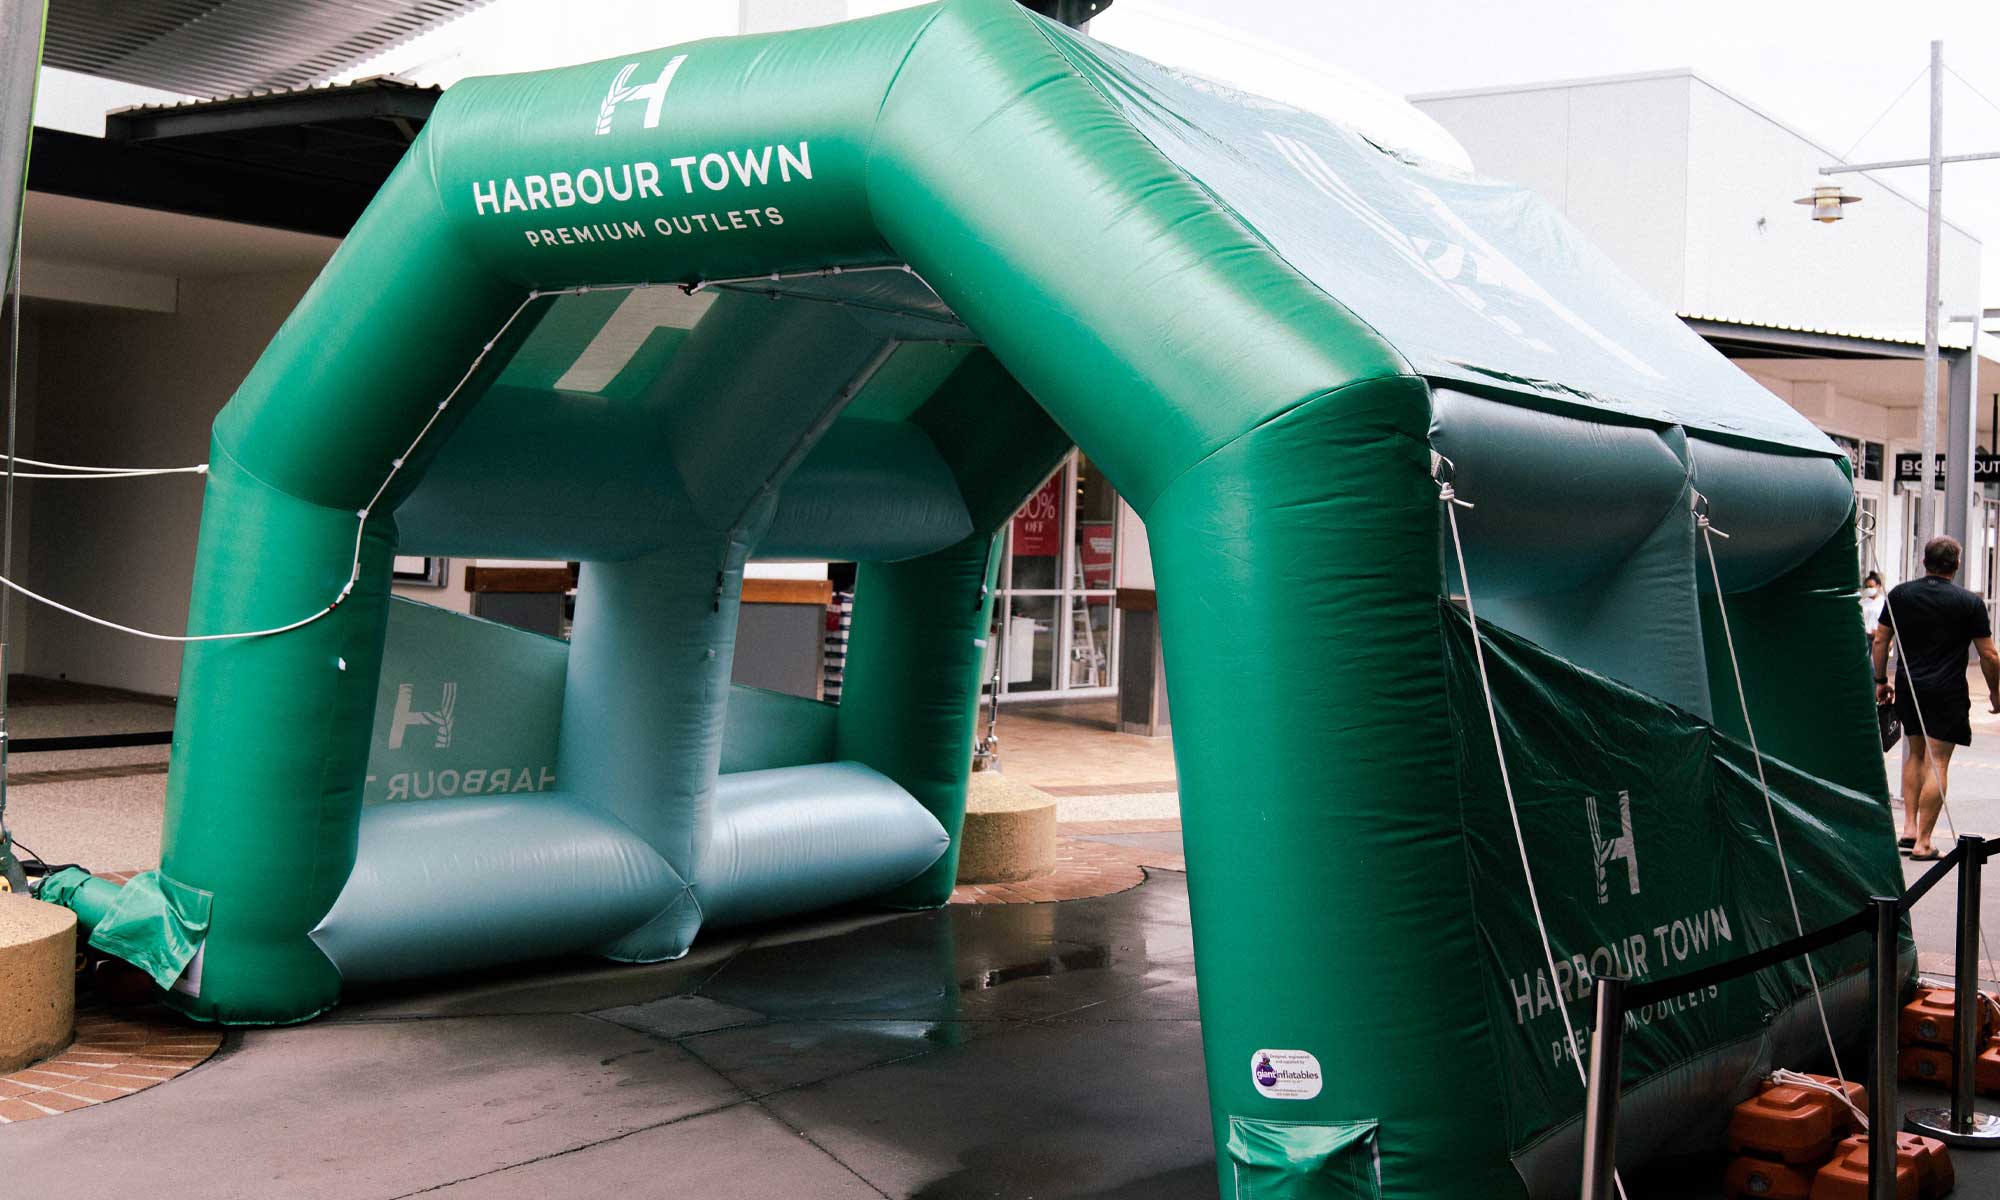 After delivery just before the summer rush, Harbour town commented on the simple useability of the design and the intense brand colours.